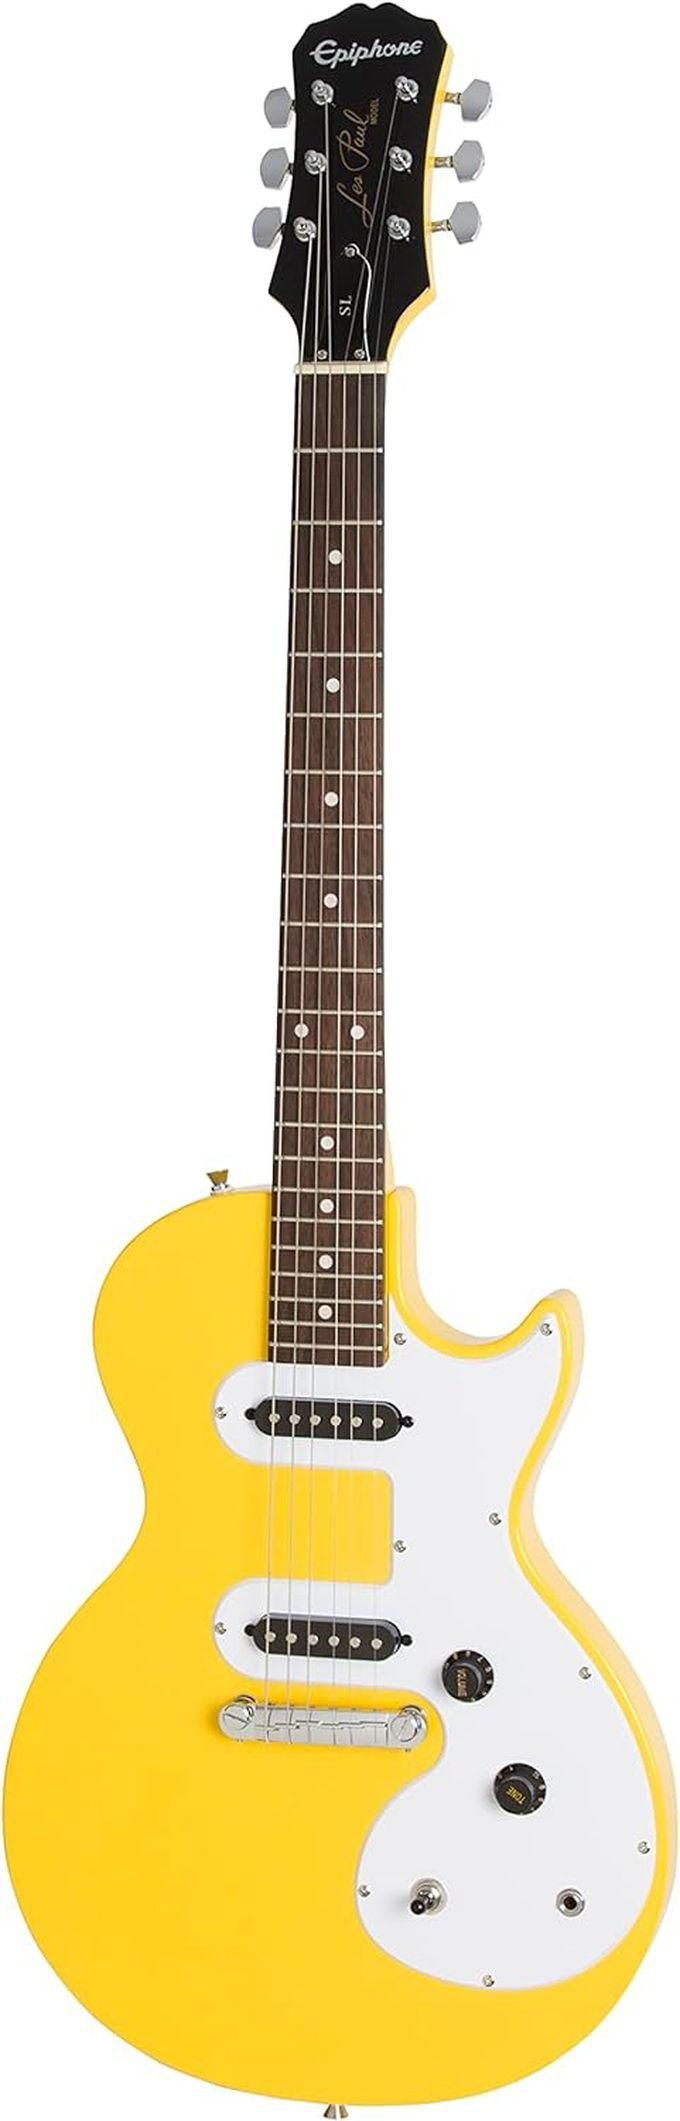 Epiphone Les Paul SL 6 Strings Right Handed Electric Guitar, Color Sunset Yellow